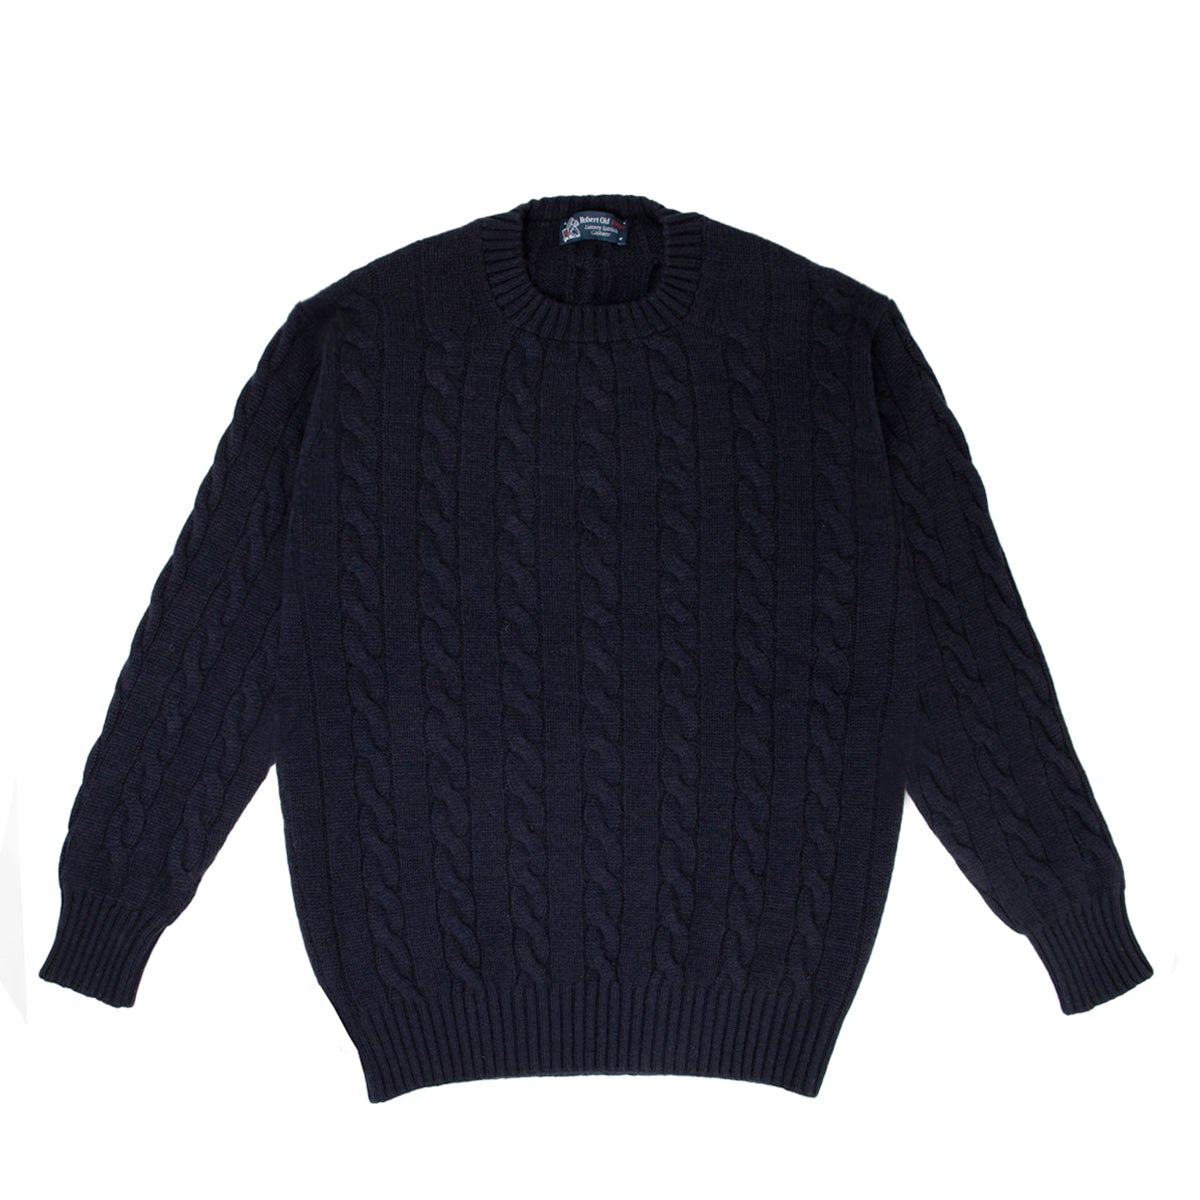 Dark Navy Rothesay 4ply Cable Crew Cashmere Sweater  Robert Old   